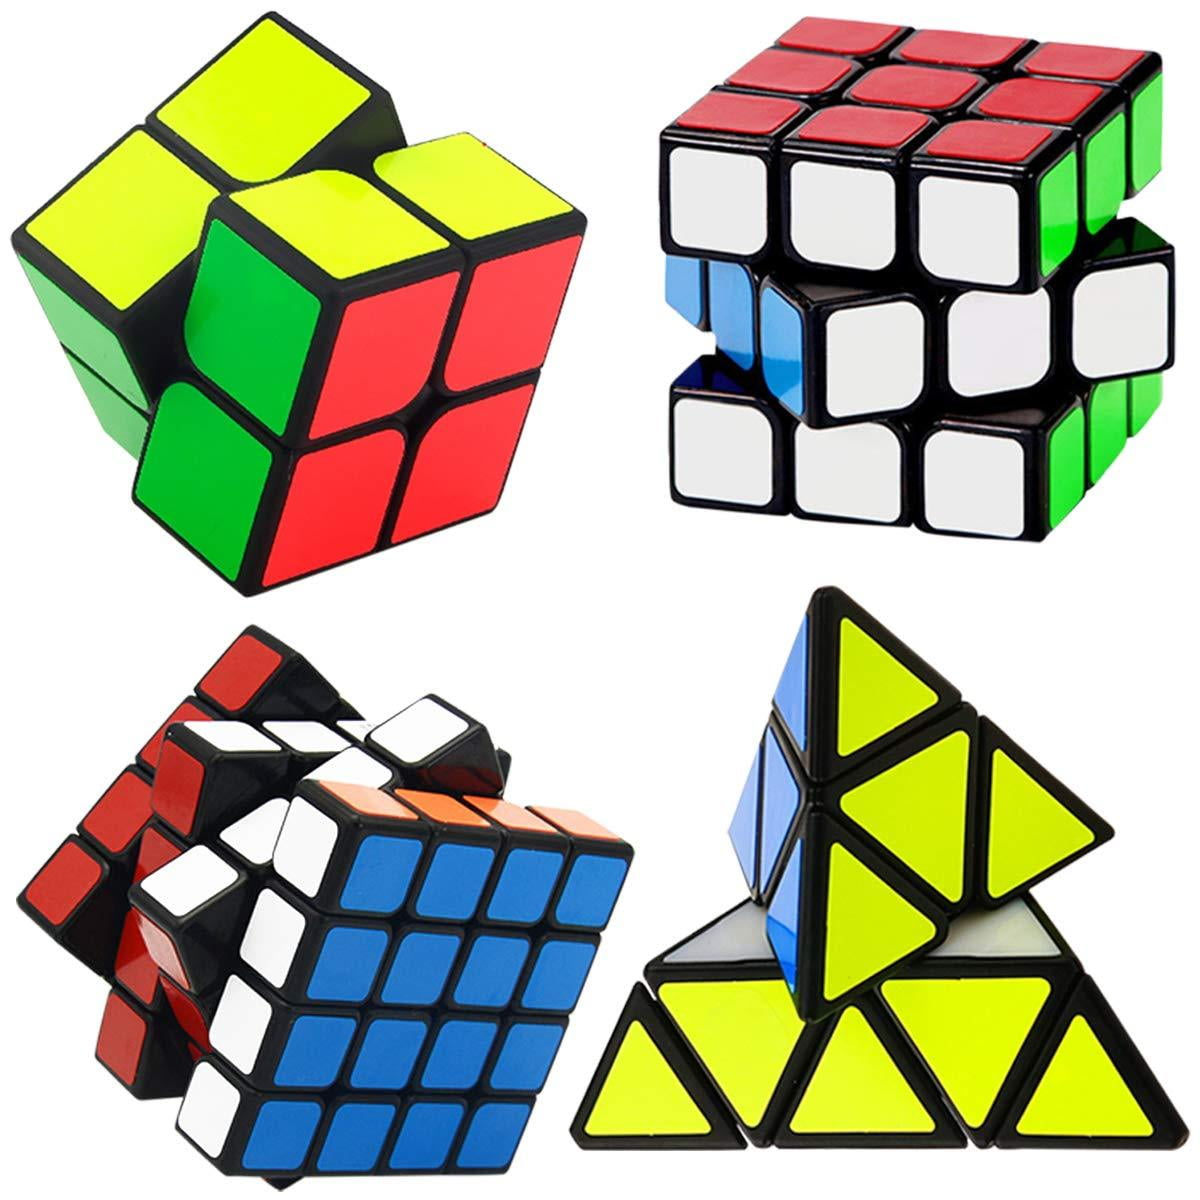 Megaminx Pyramid Skewb lvy Cube Mirror Cube Smooth Speedcubing Magic Cube Puzzle for Adults and Kids for 3x3 Cube Keychain 9 Pack YGZN Speed Cube Set 8 Pack 2x2 3x3 4x4 Speed Cube 